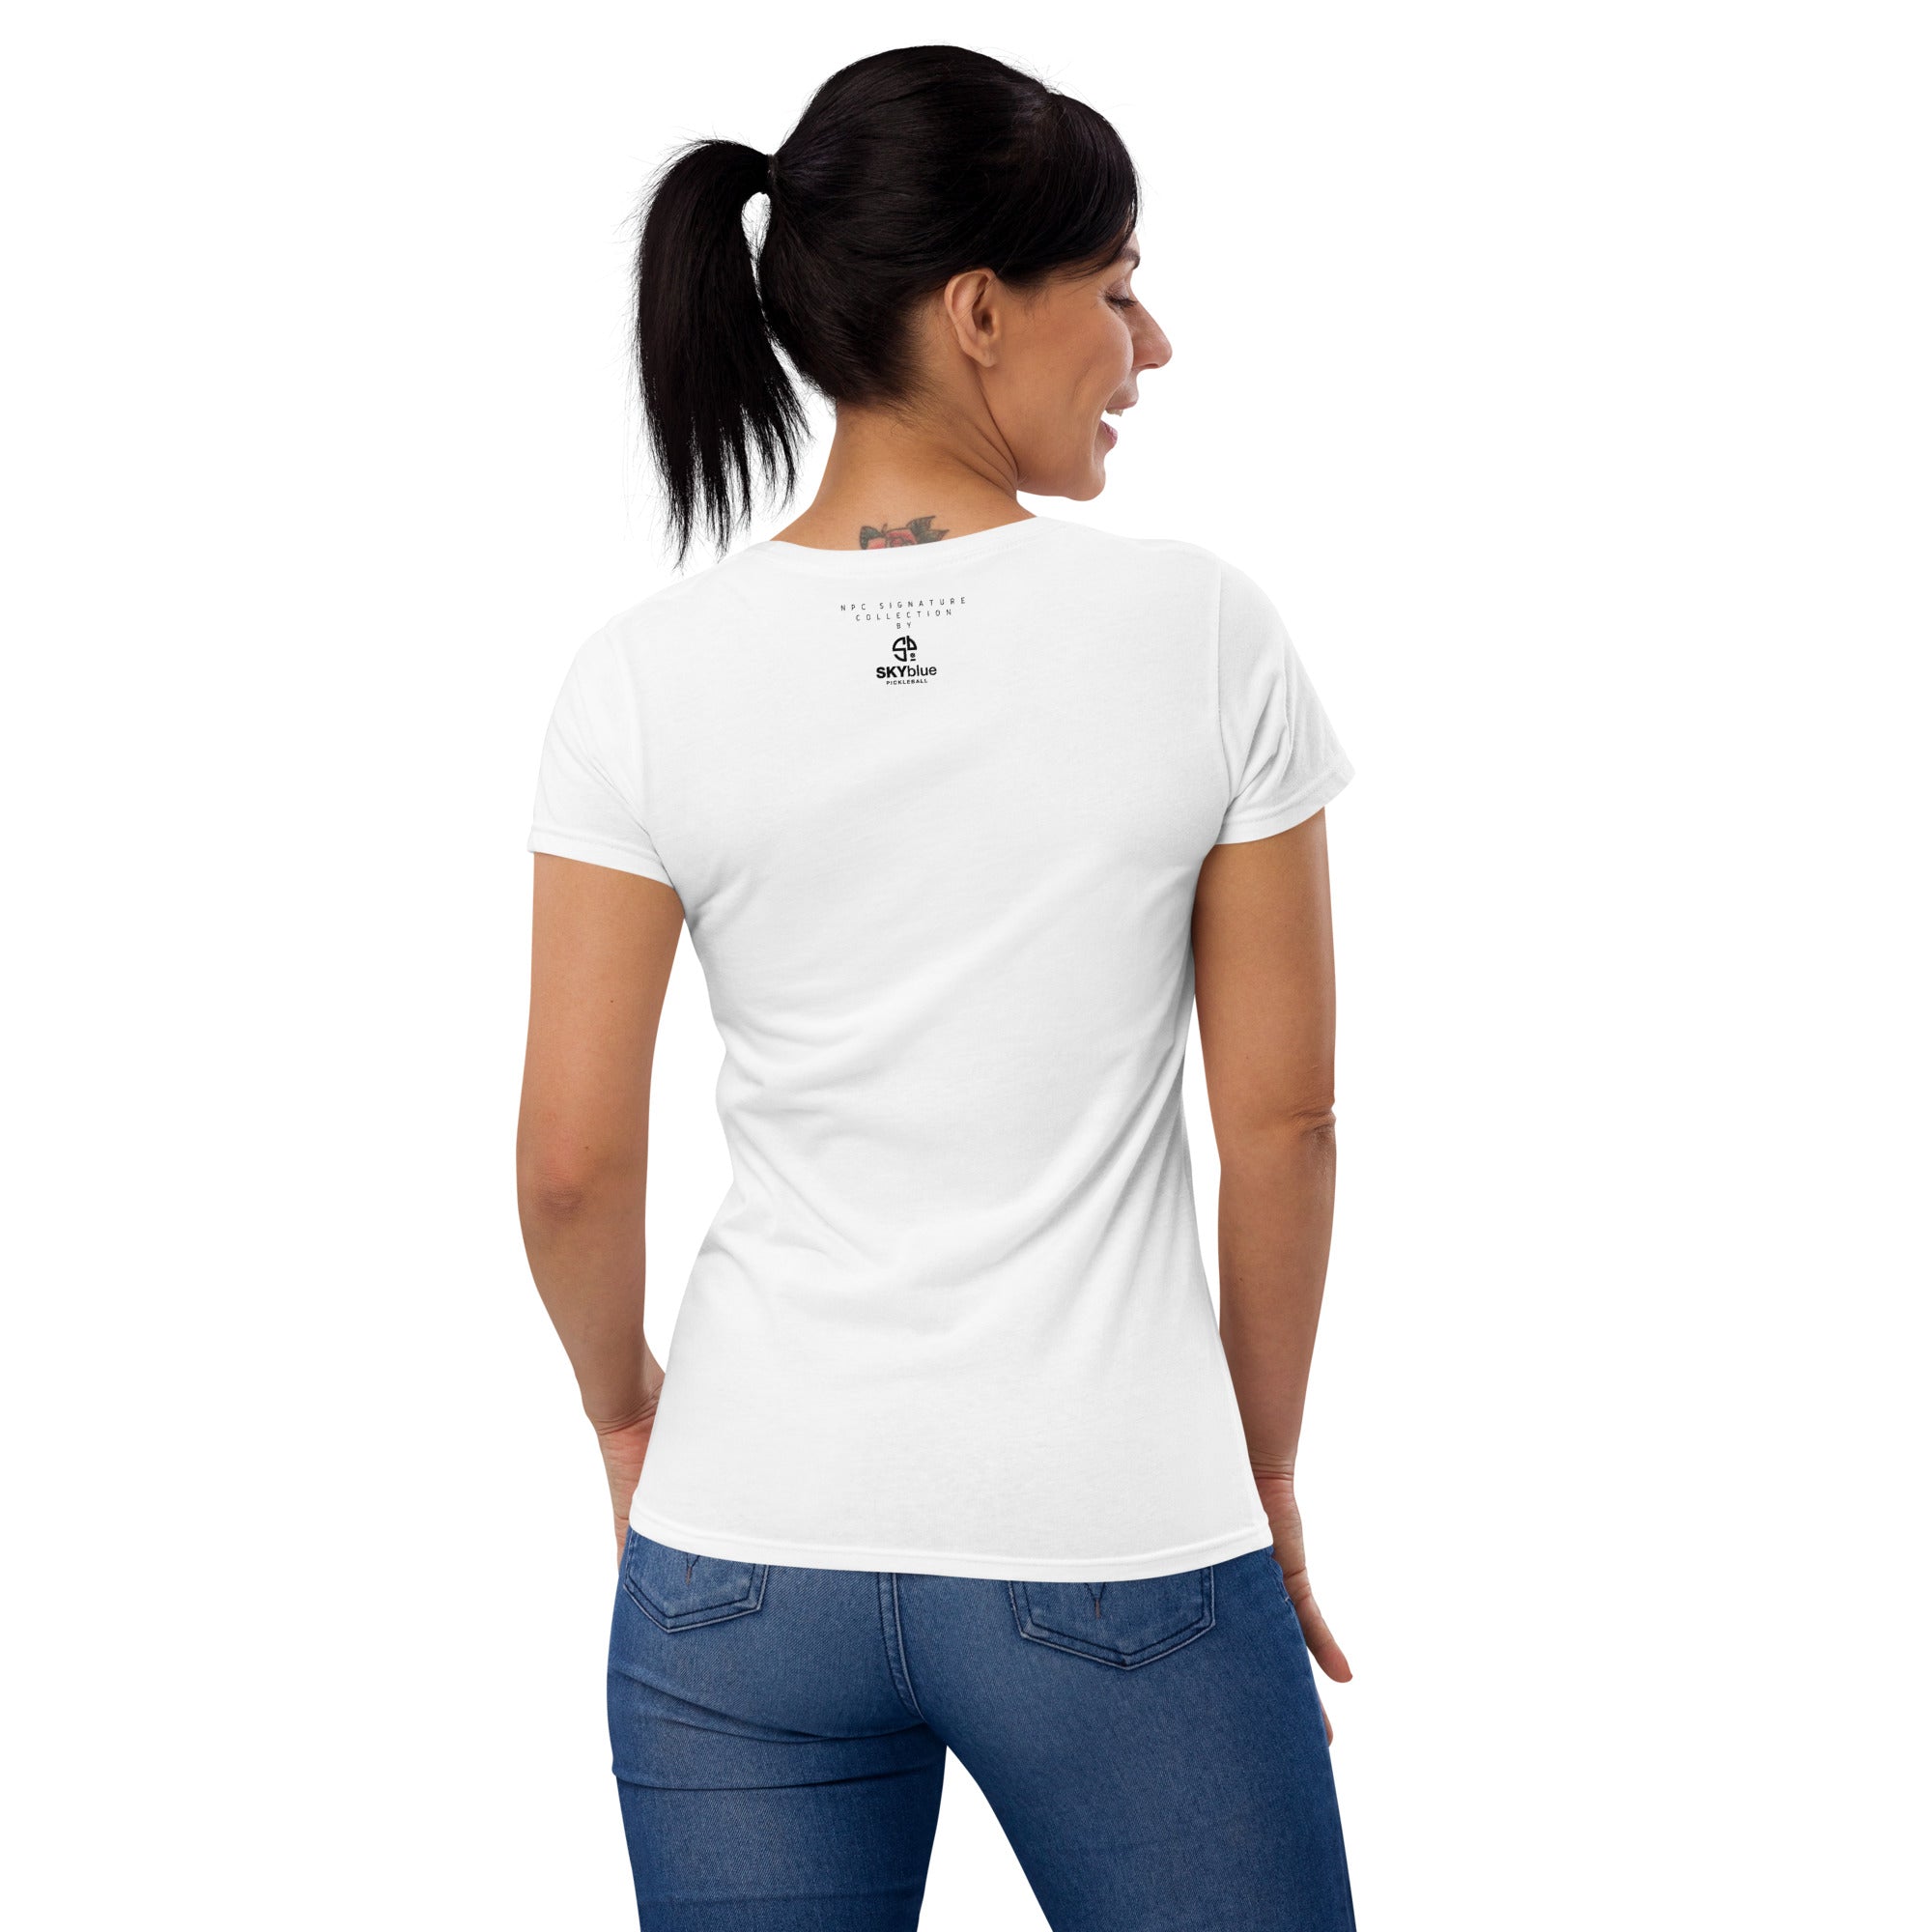 NPC Signature Collection "Go with the Flow!" Women's short sleeve cotton t-shirt